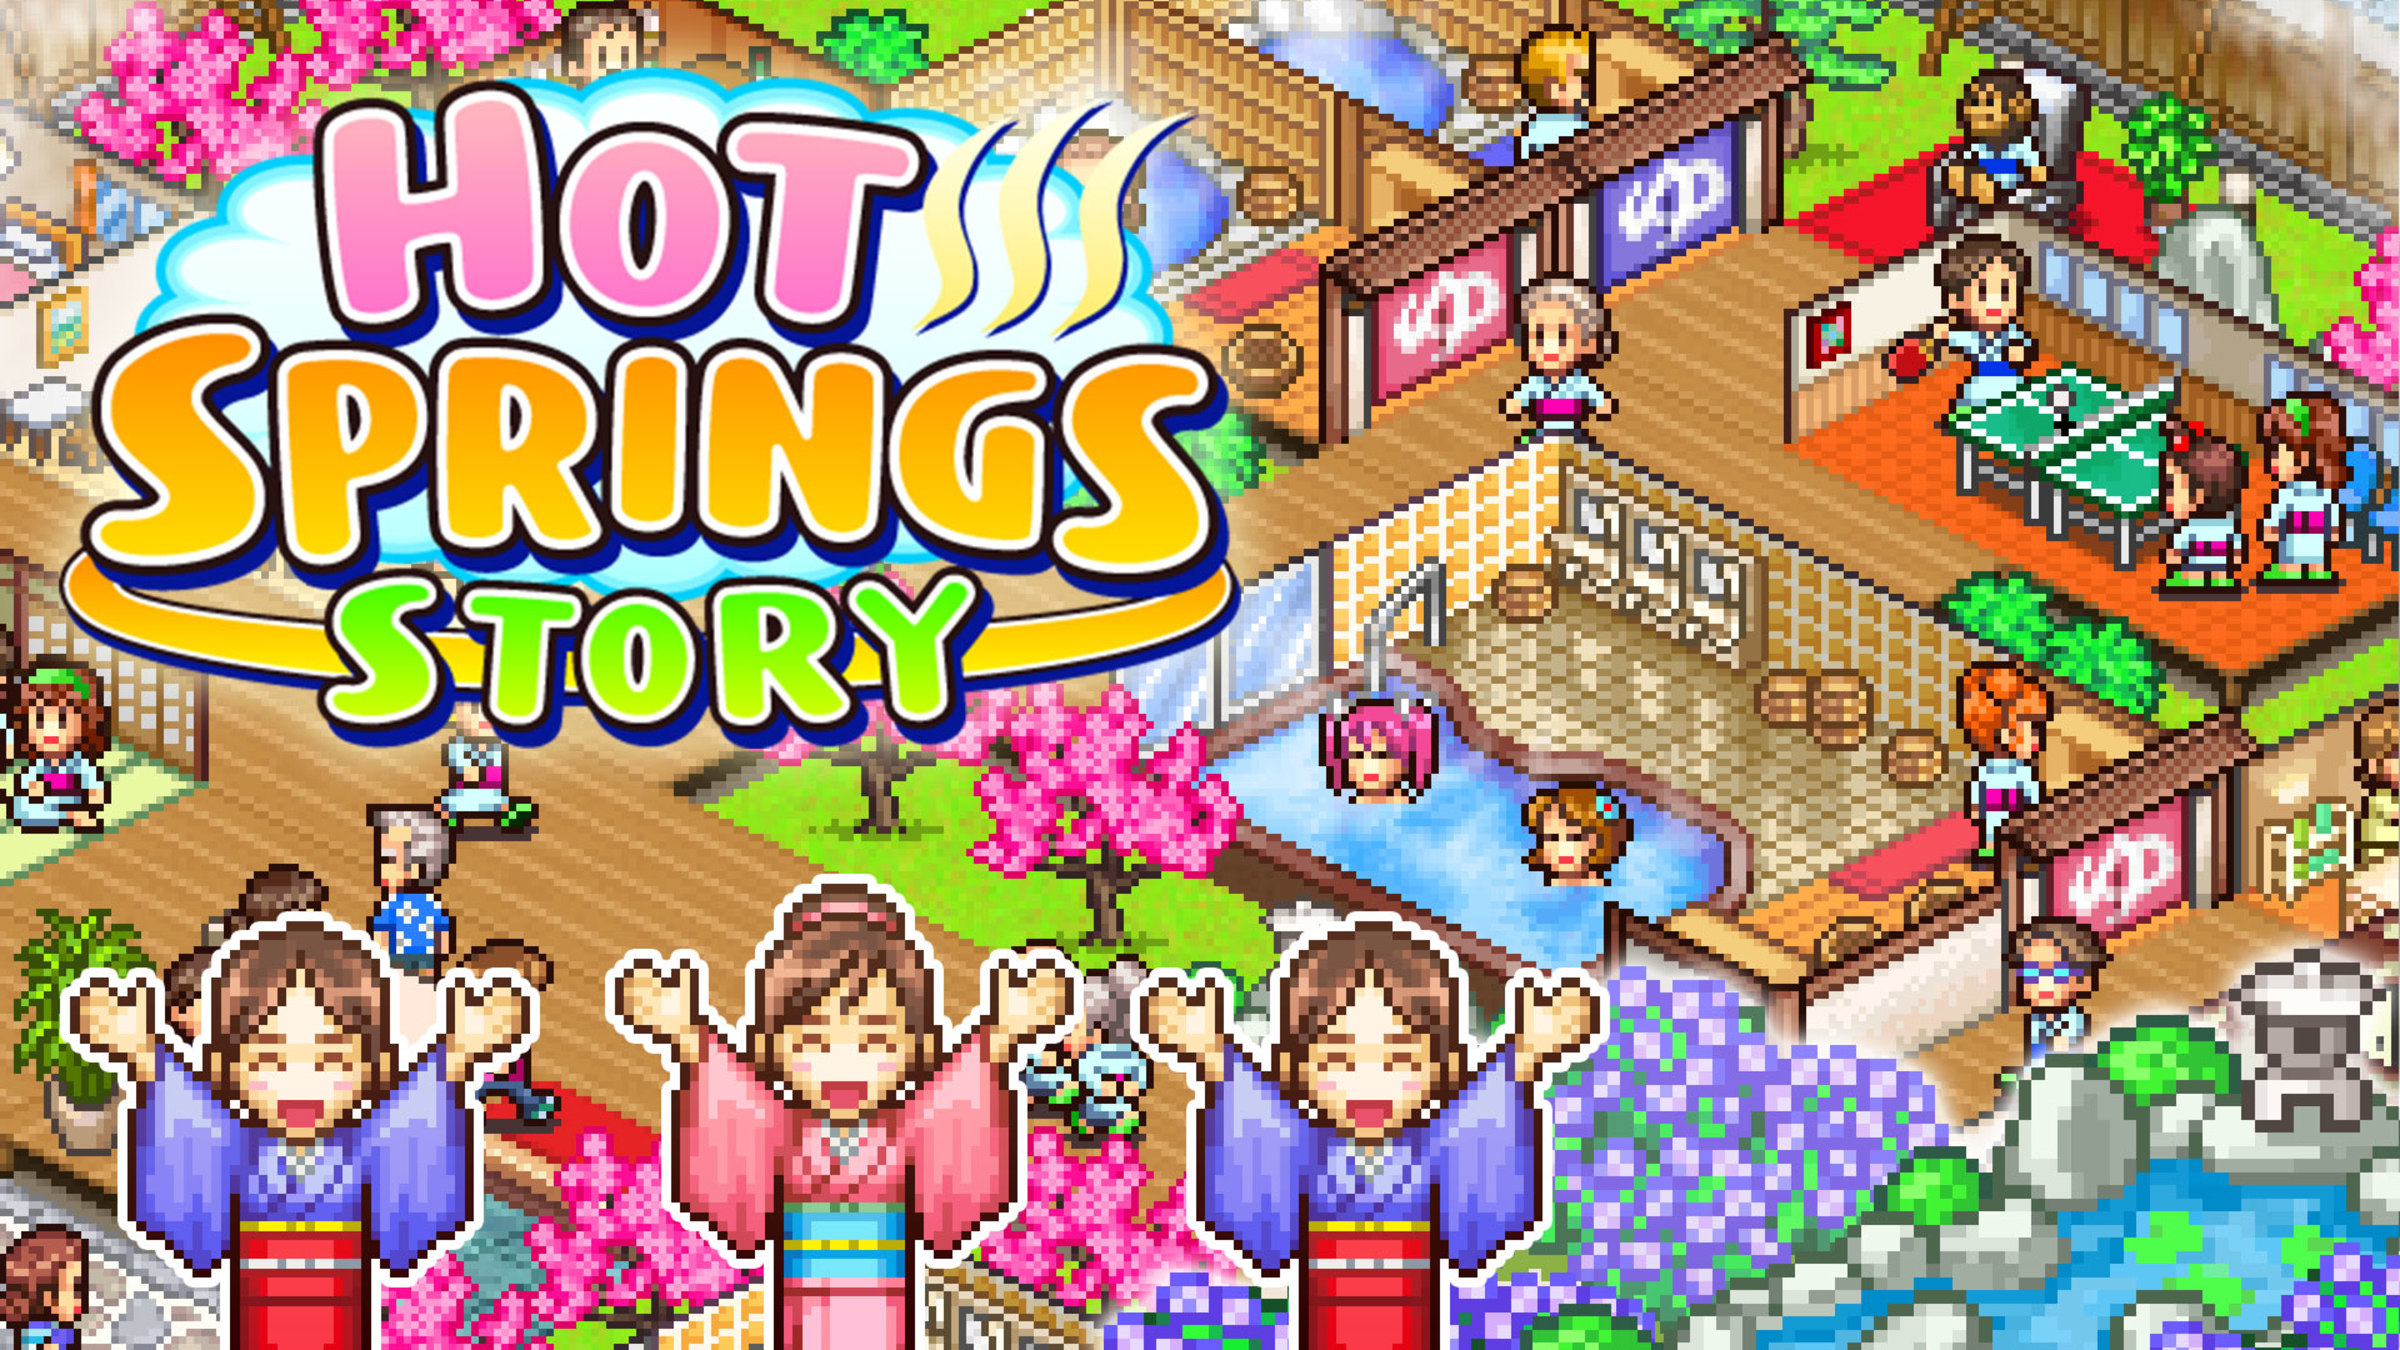 Hot Springs Story for Nintendo Switch - Nintendo Official Site